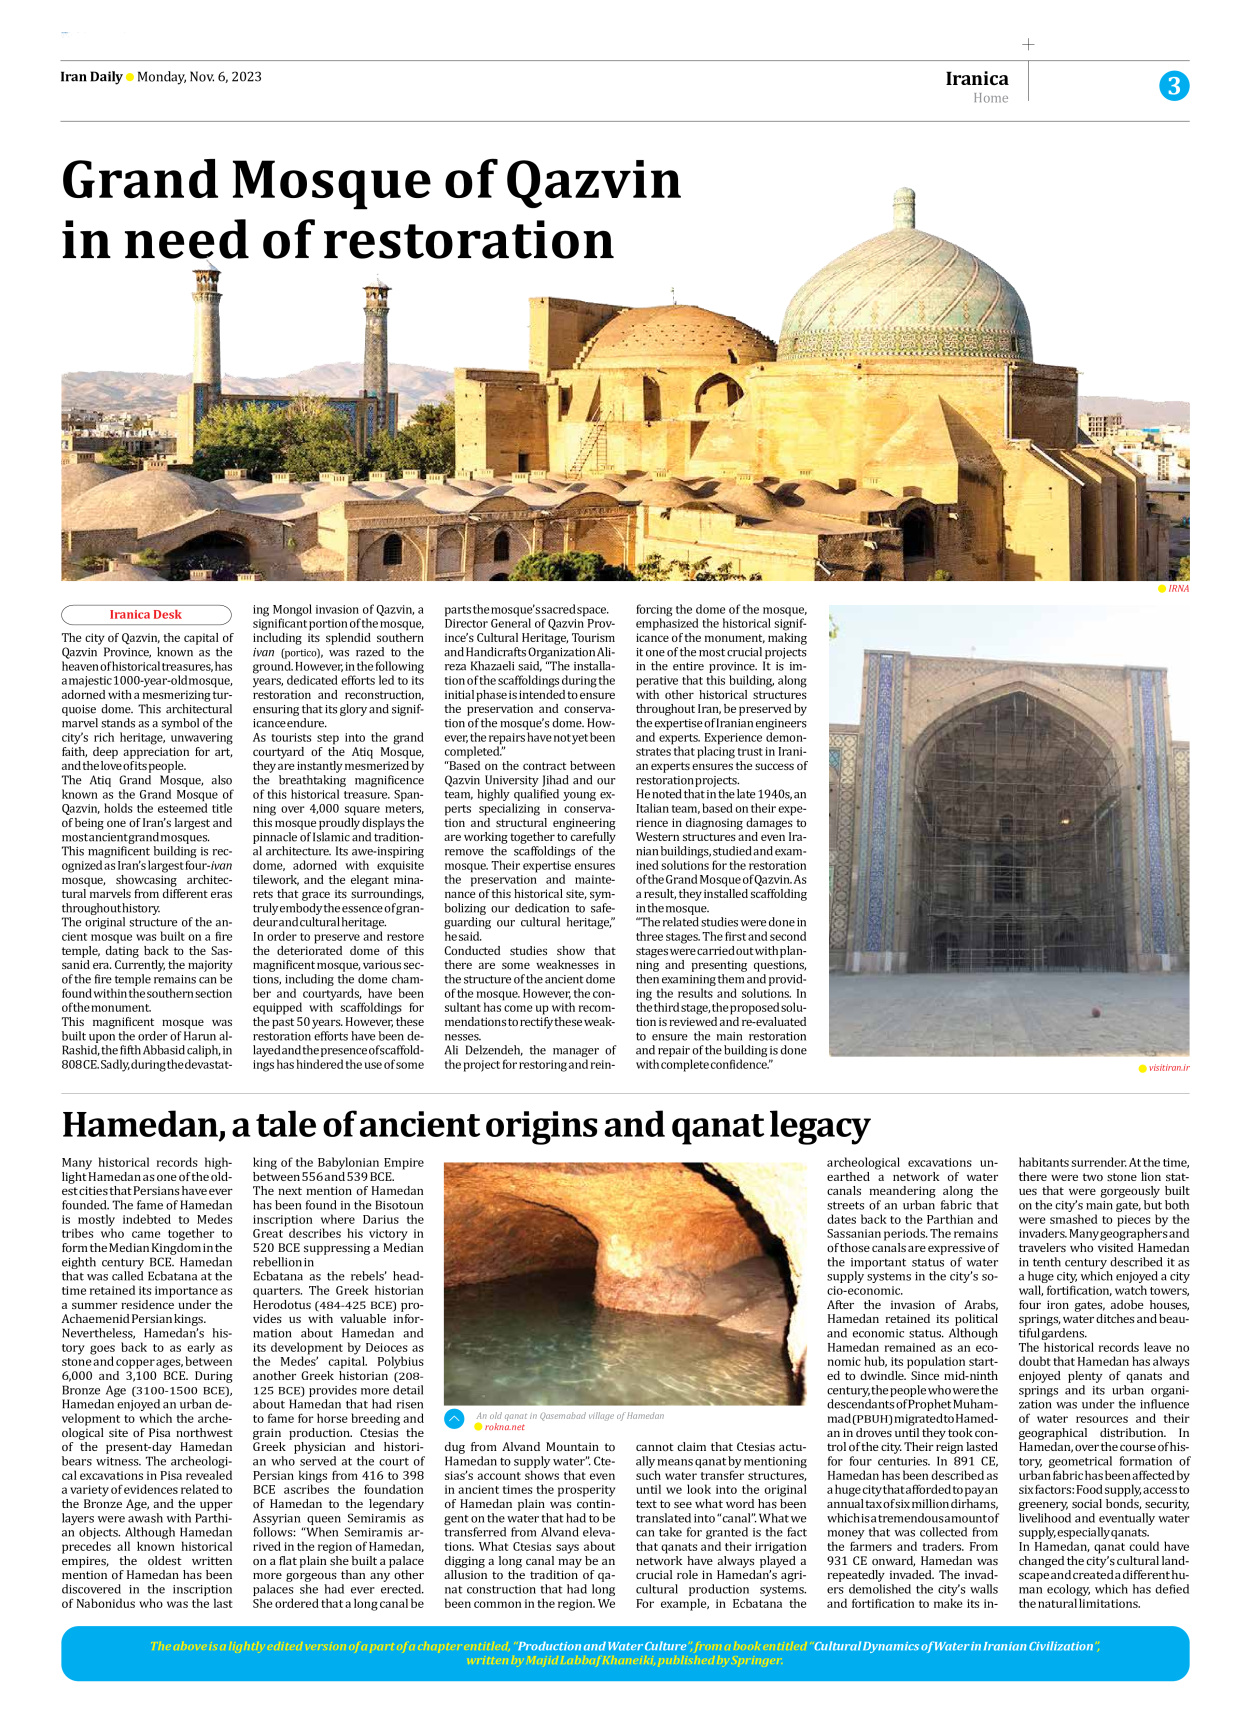 Iran Daily - Number Seven Thousand Four Hundred and Twenty Seven - 06 November 2023 - Page 3